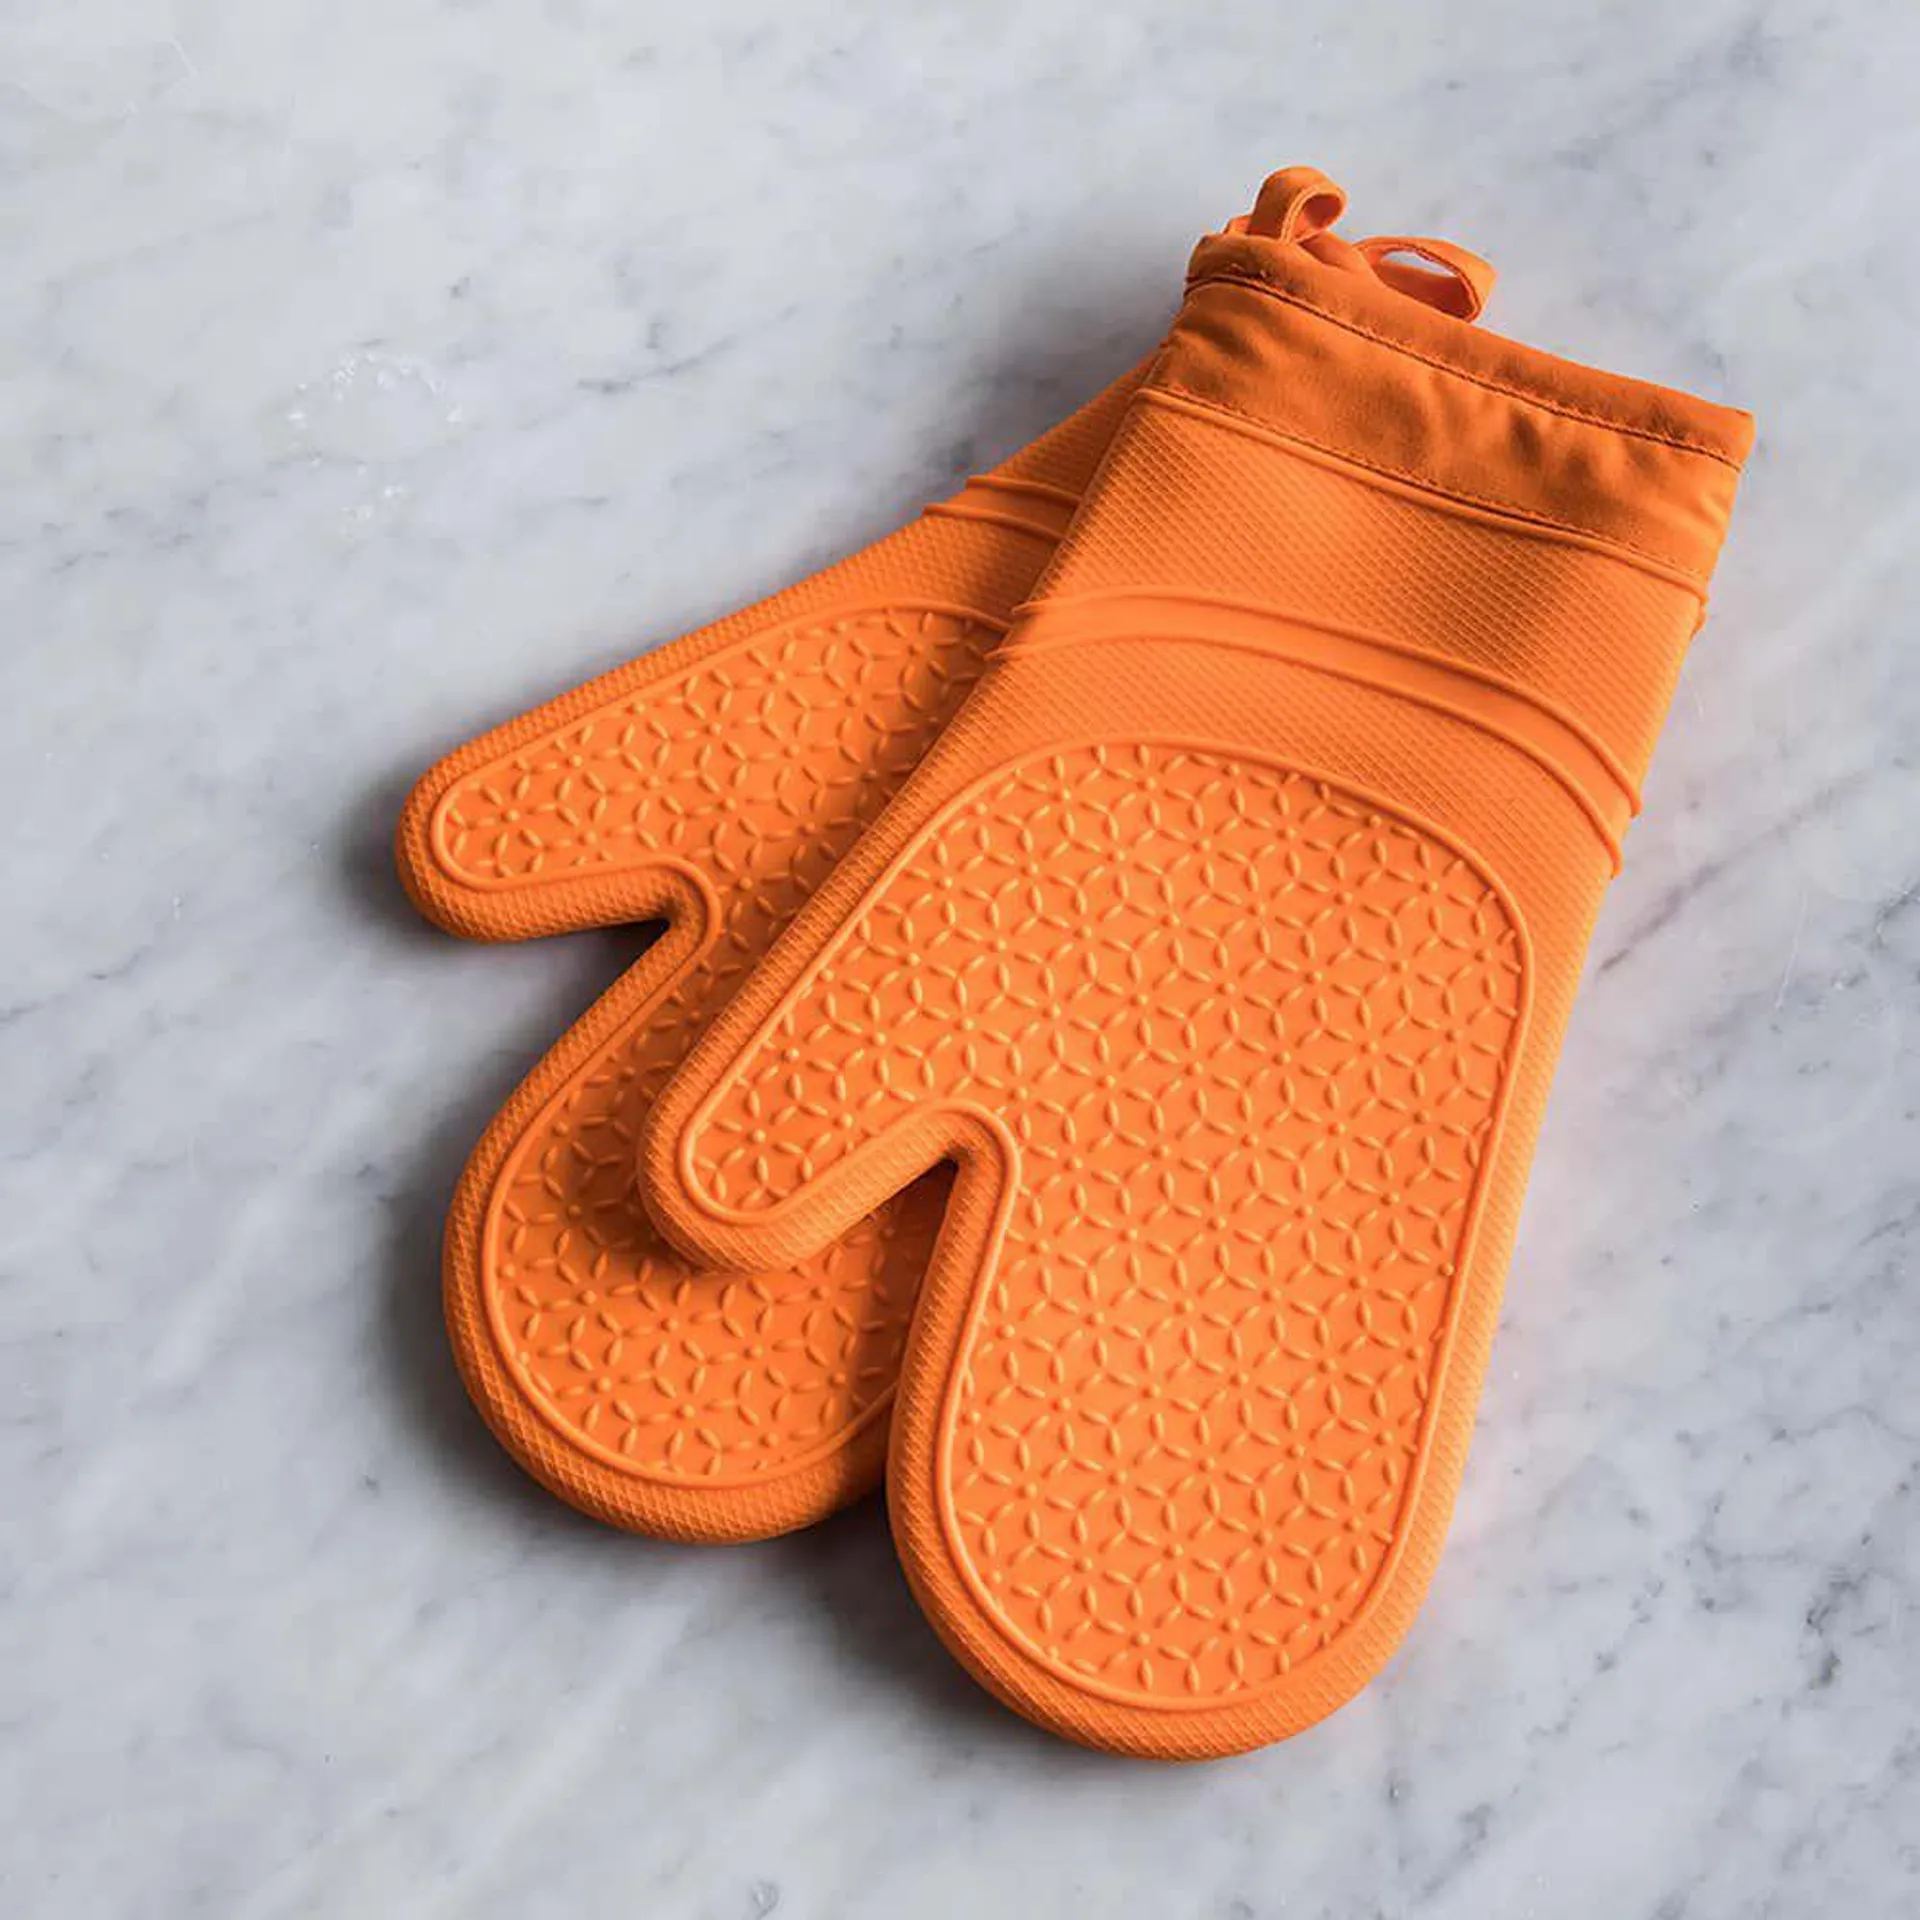 KSP Luxe Lined Silicone Oven Mitt - Set of 2 (Orange)